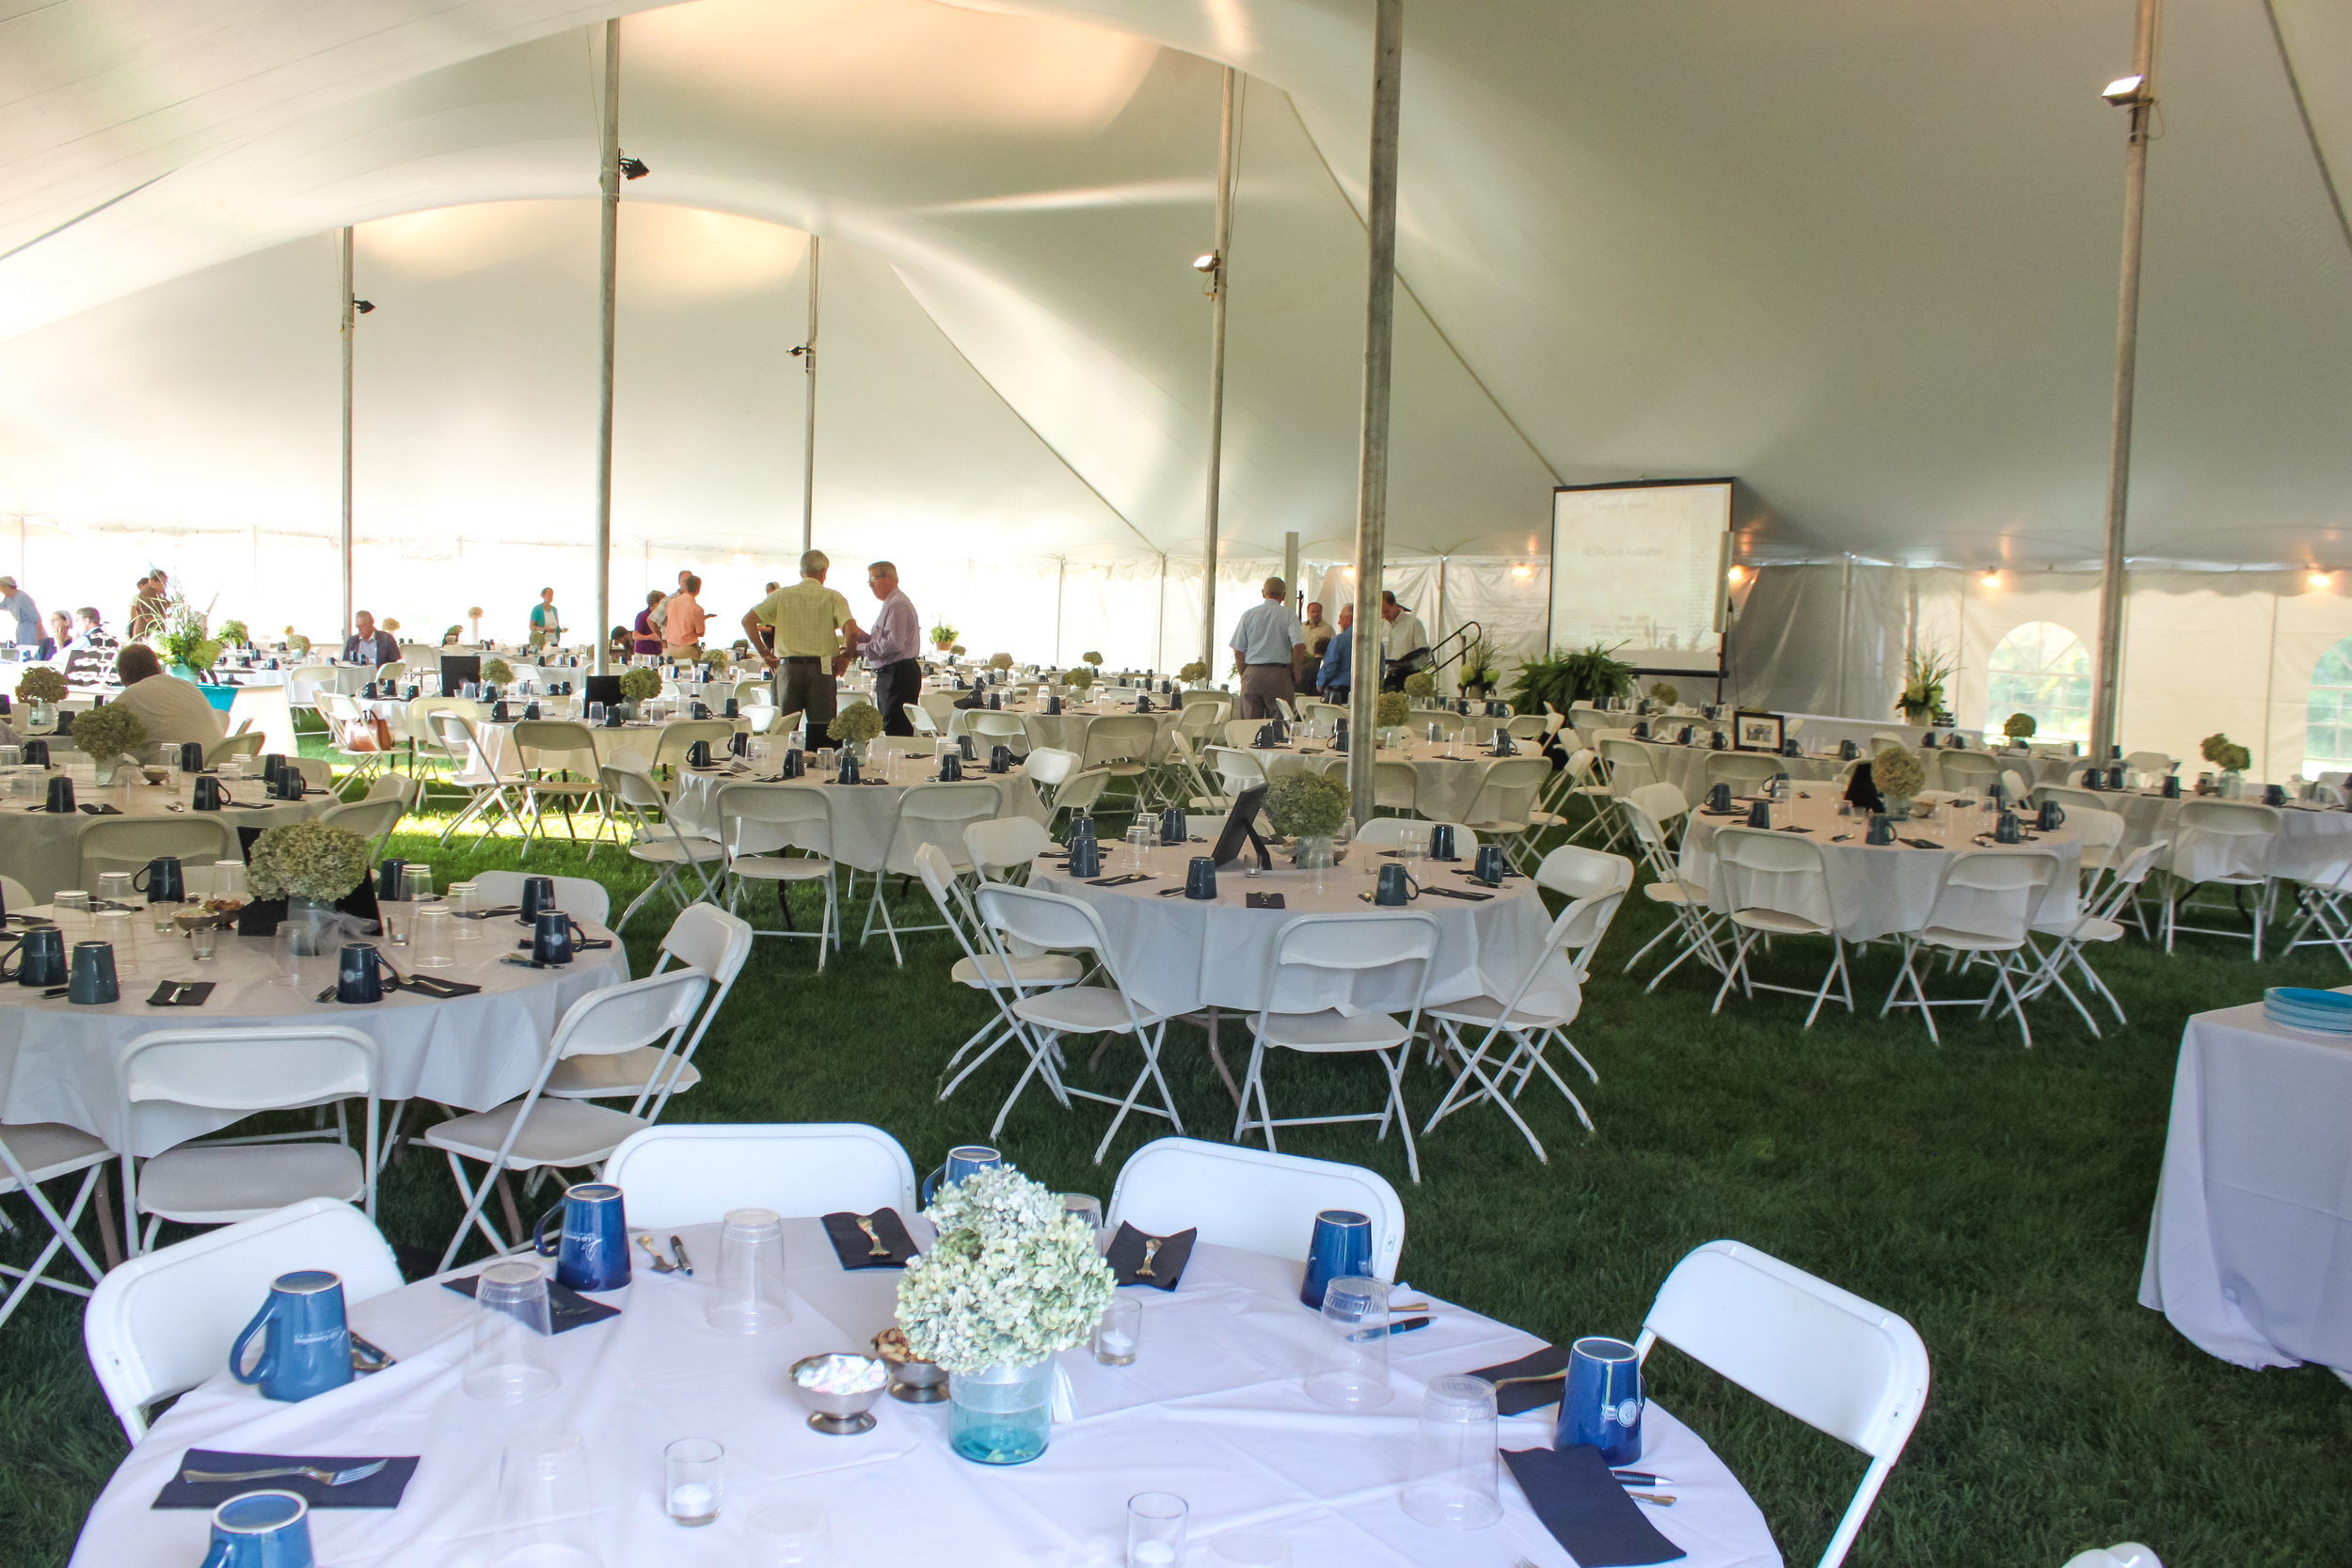 White folding chairs and 60" round tables